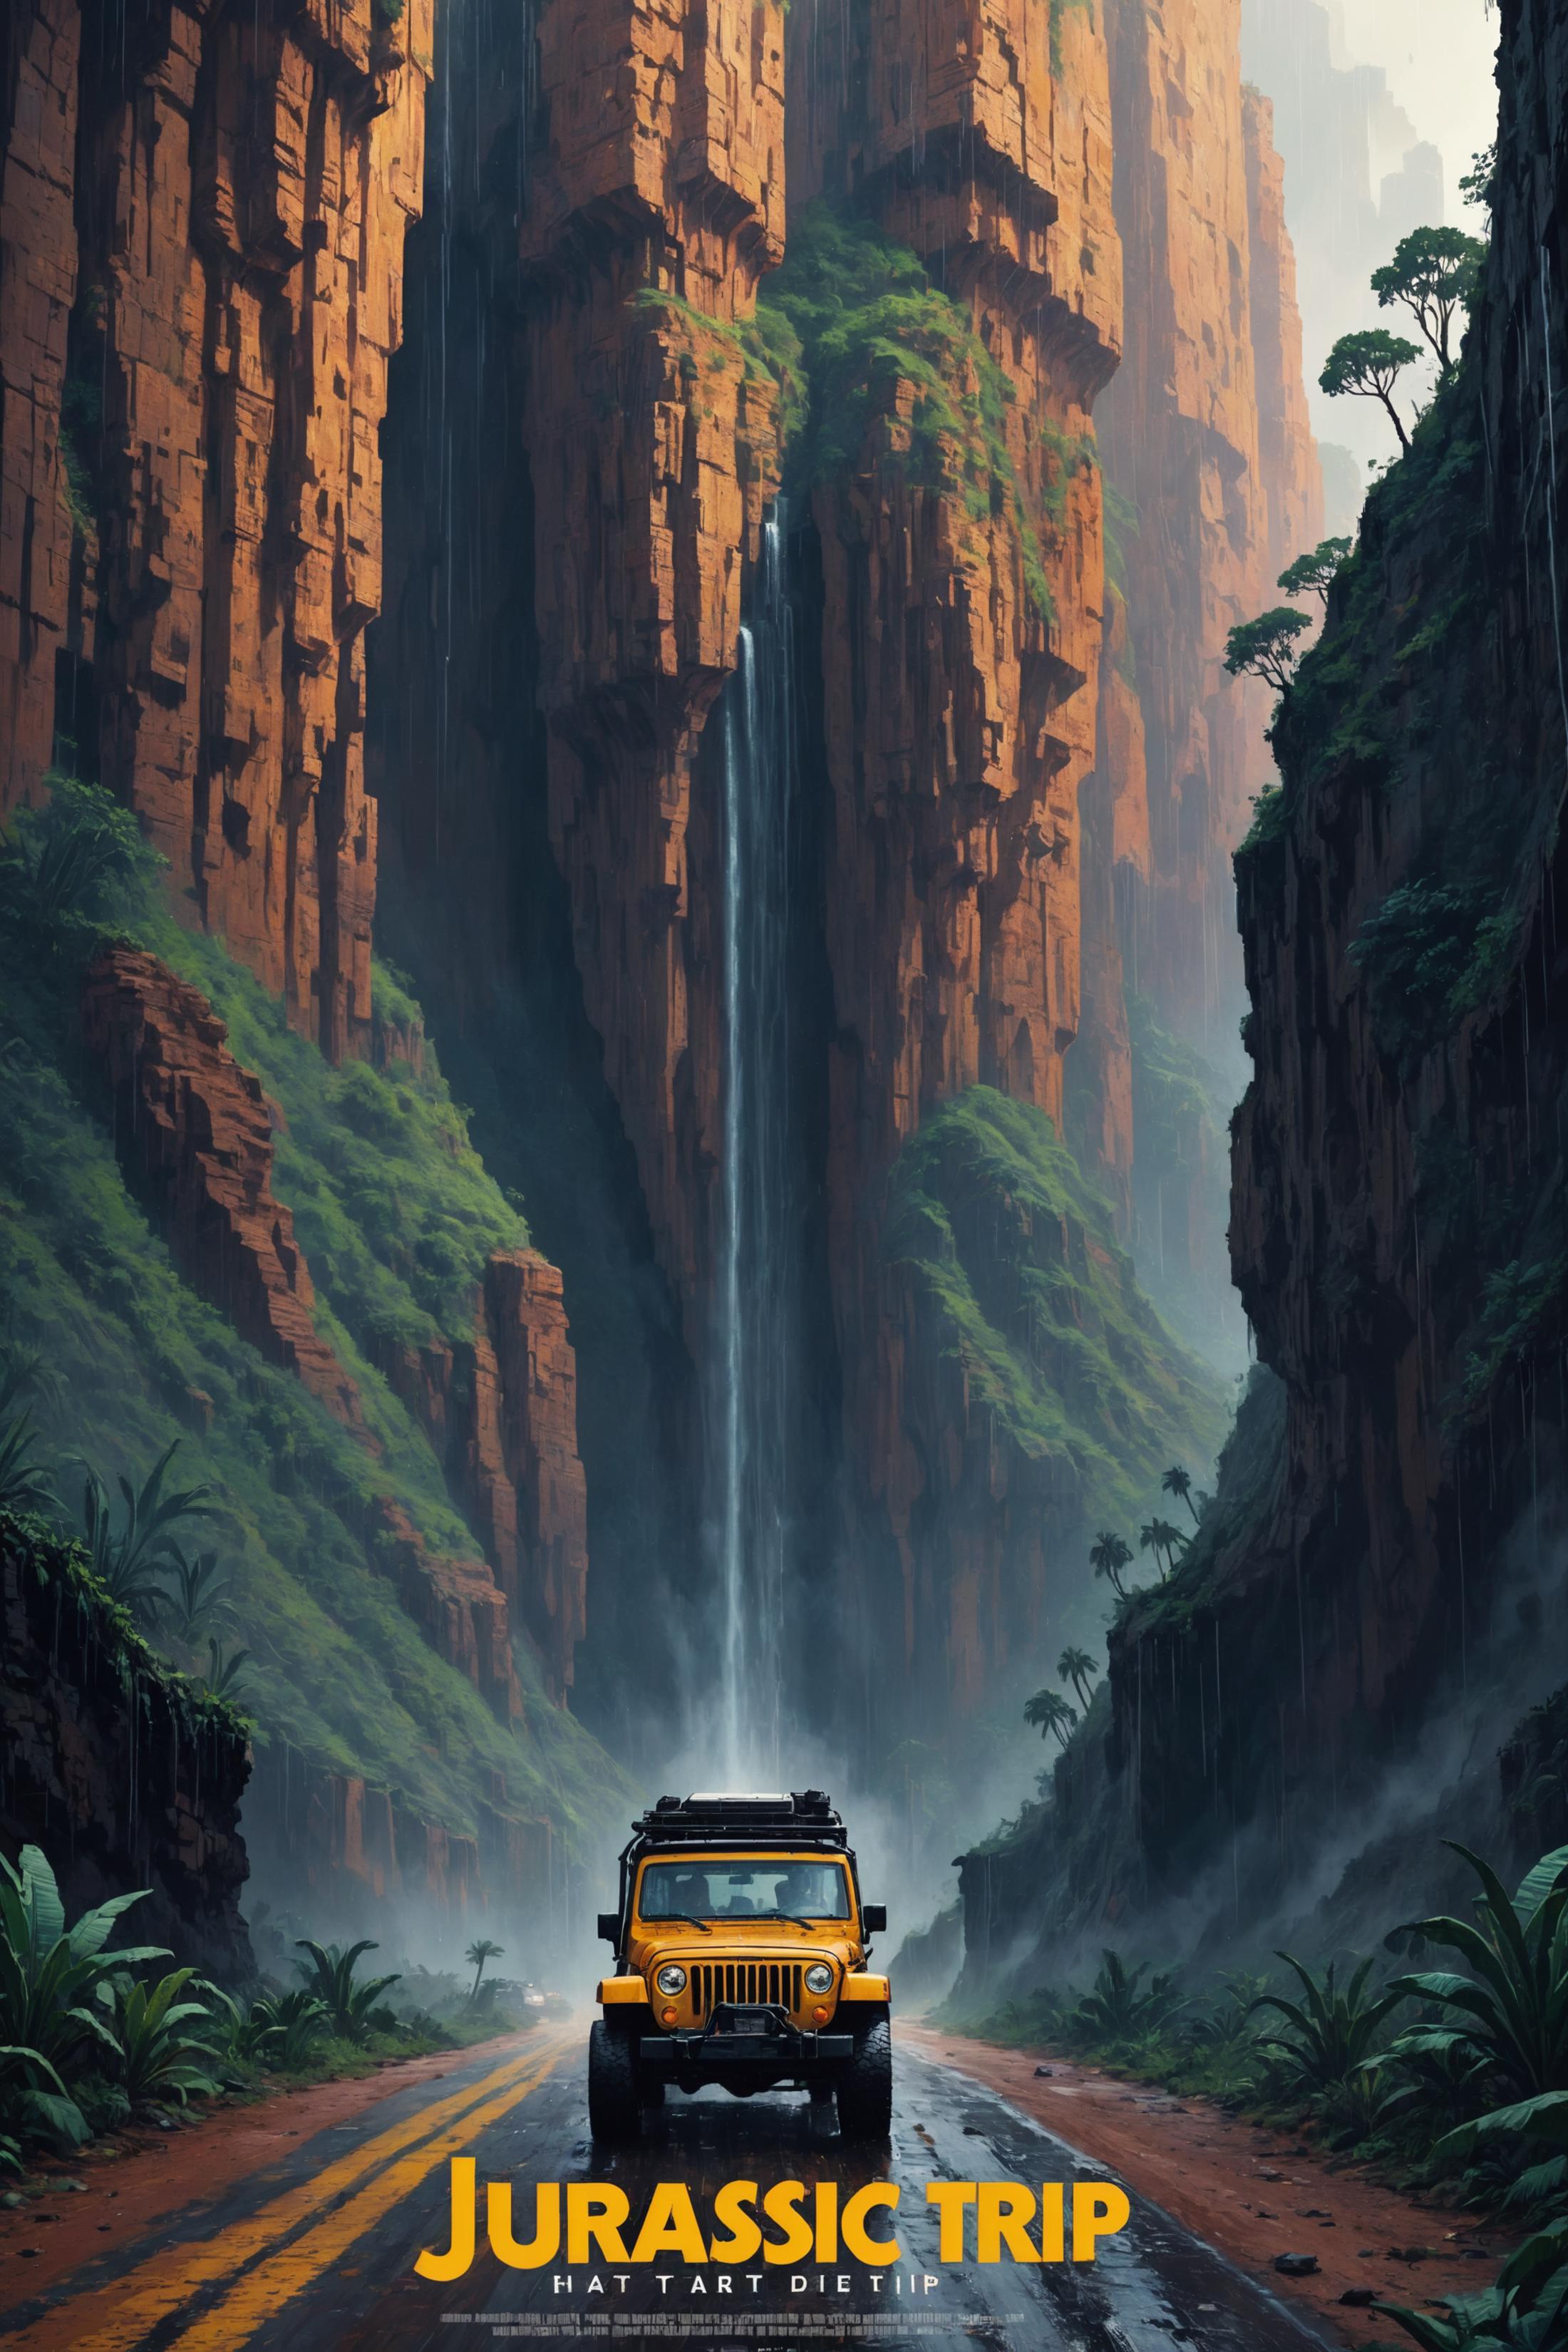 A Yellow Truck Driving Through a Mountain Pass with Waterfalls